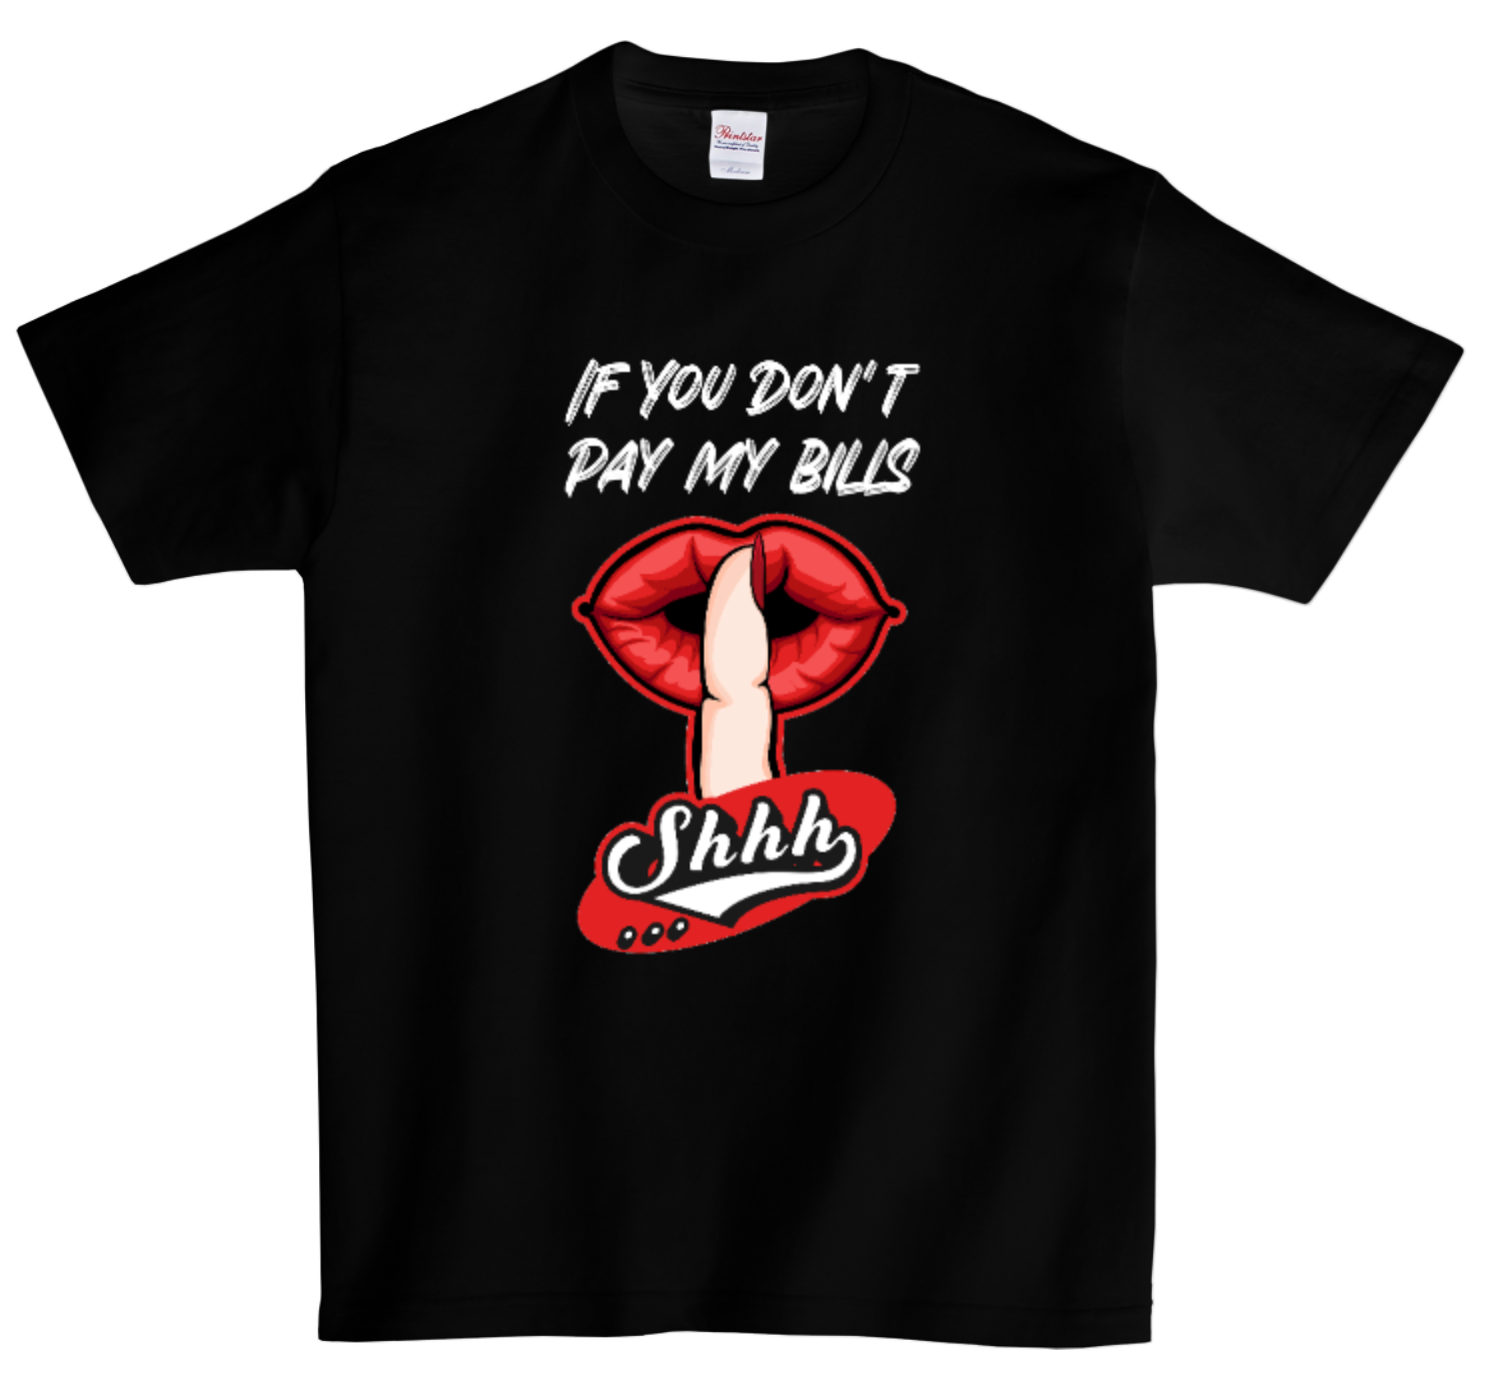 If you don't pay my bills DTG T-Shirt | Grooveman Music